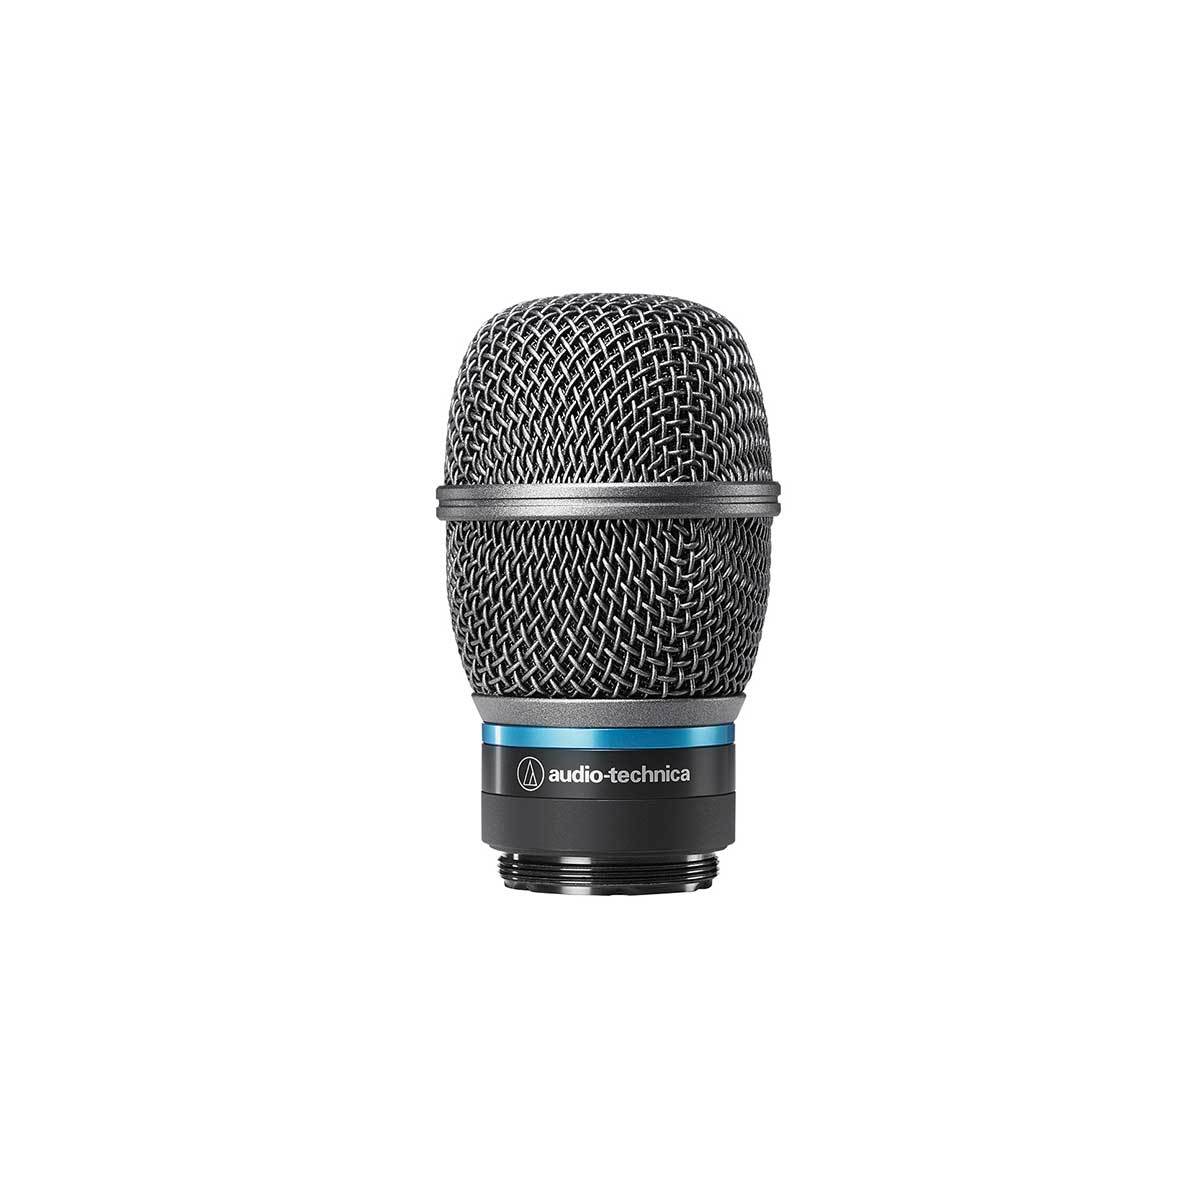 Wireless Systems - Audio-Technica ATW-C5400 Interchangeable Cardioid Condenser Microphone Capsule